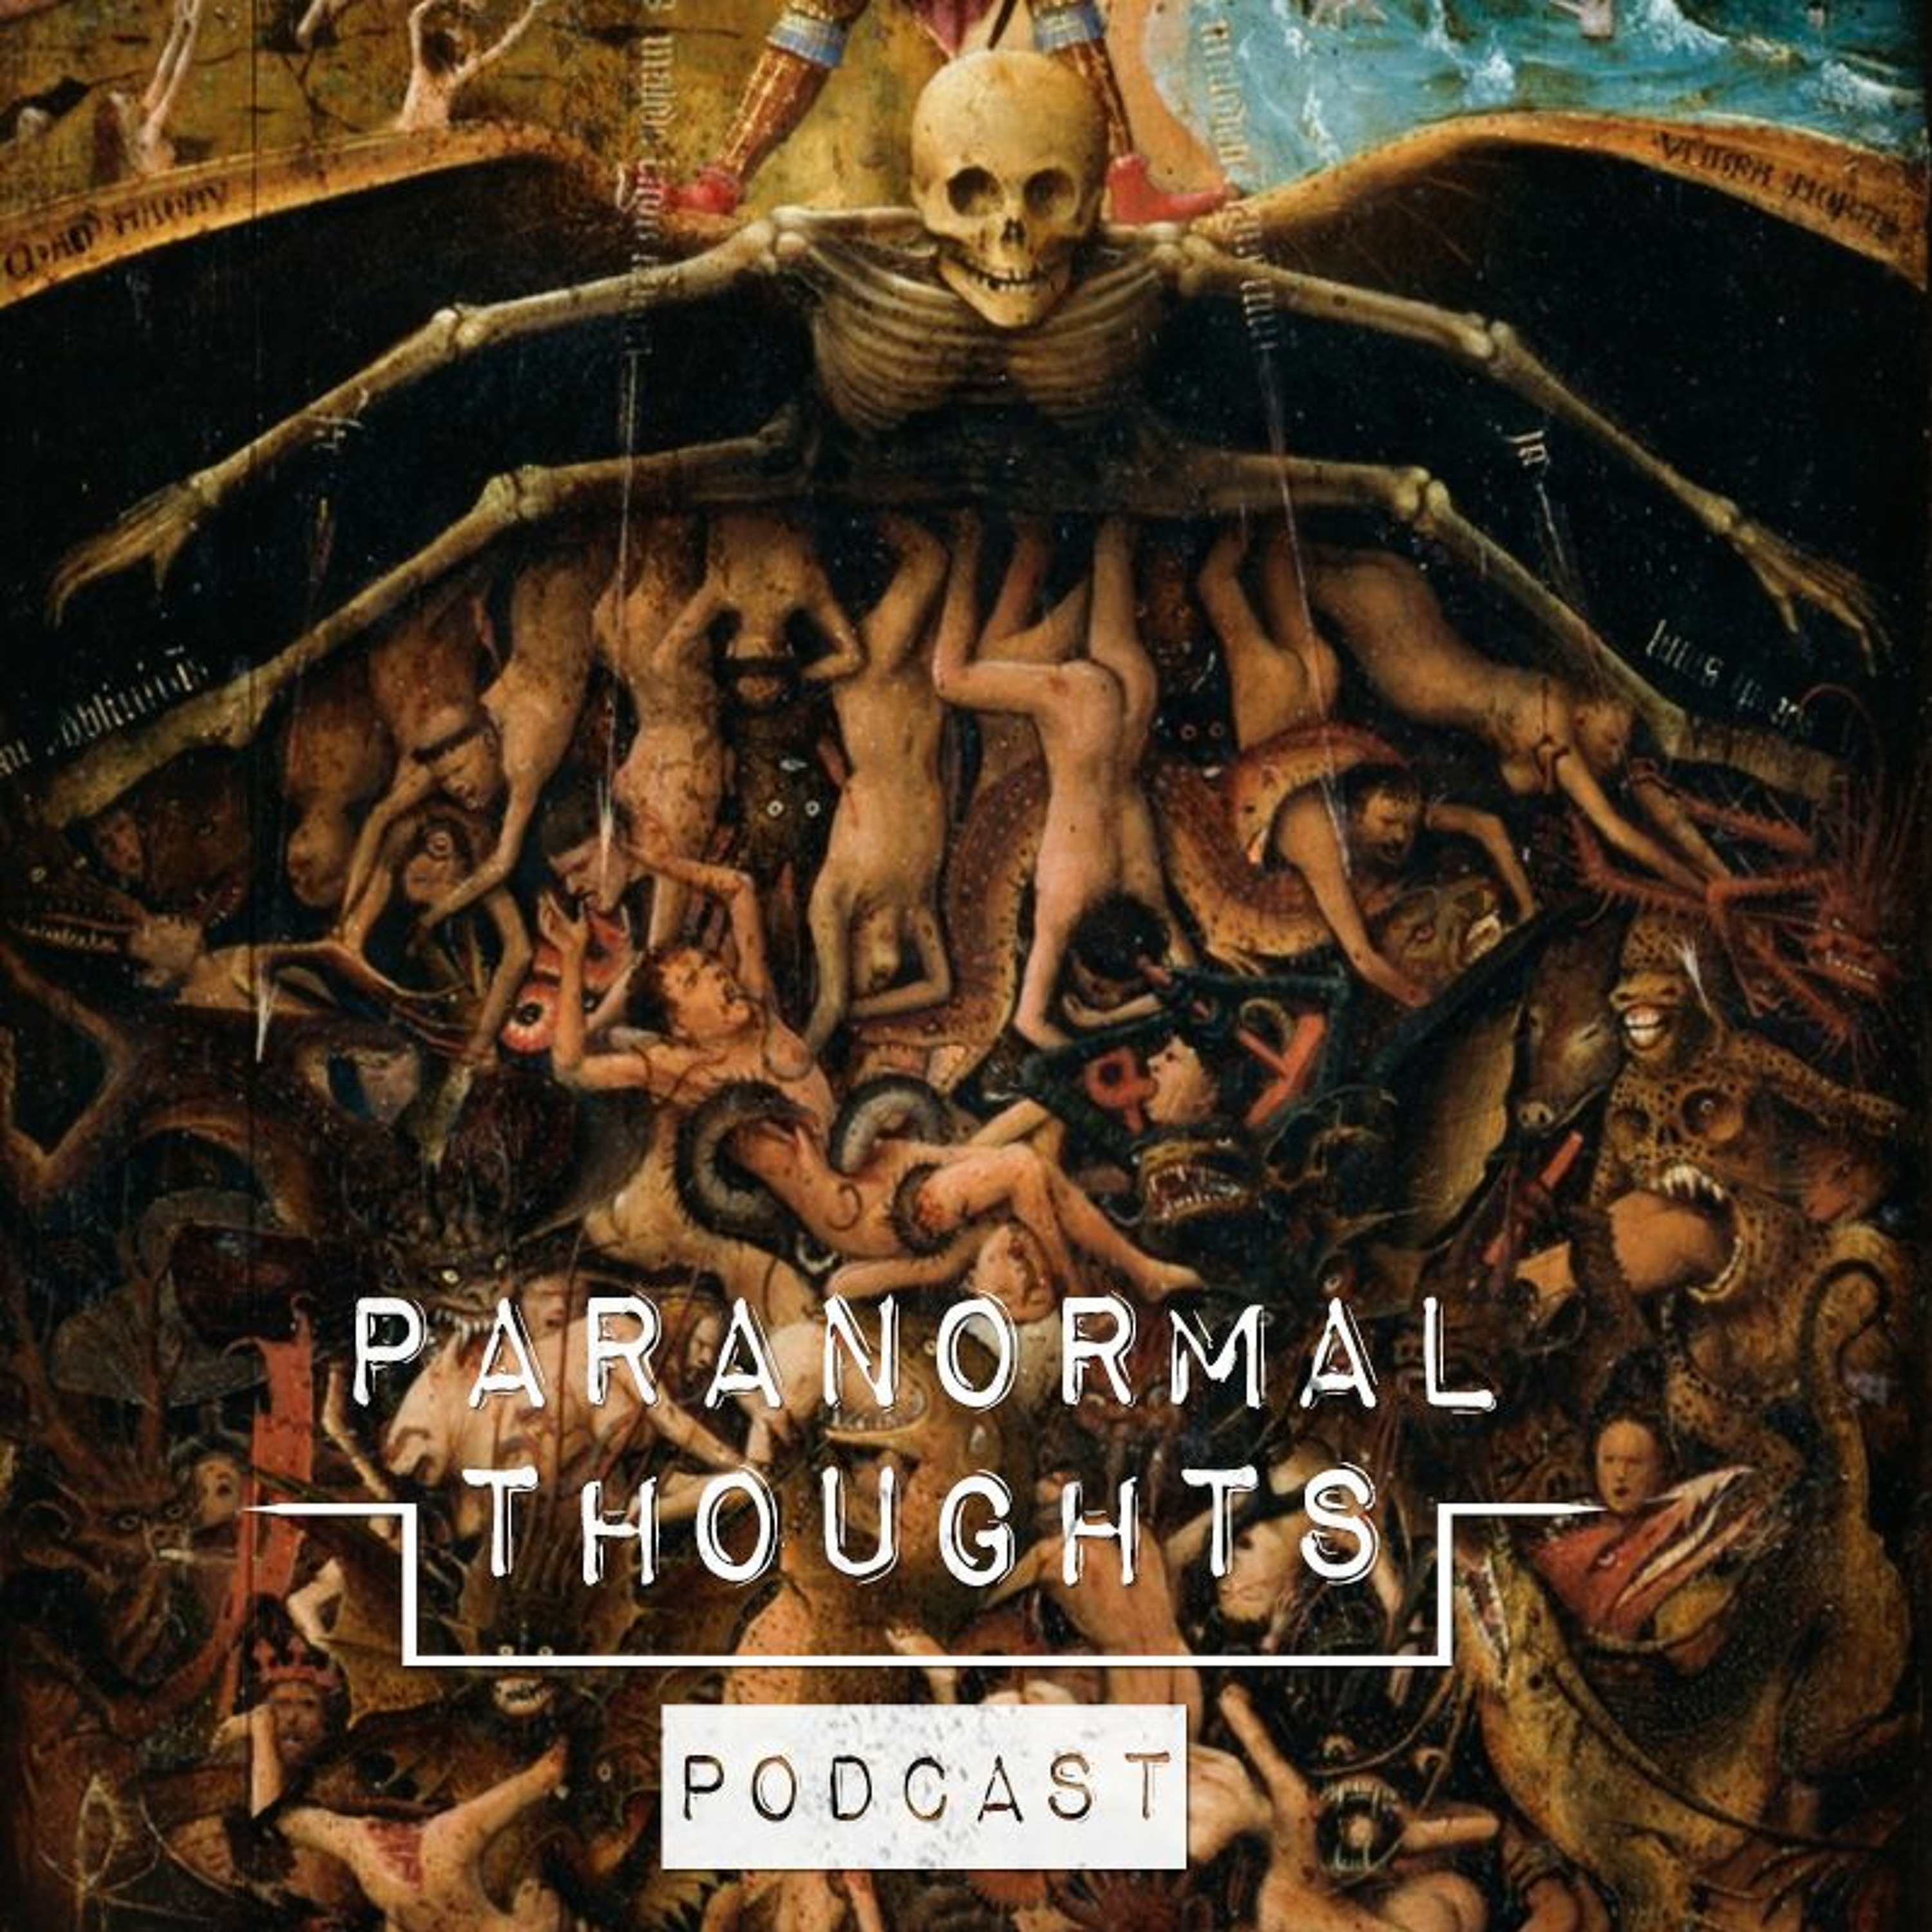 Talking About Demons With Demonologists Podcast